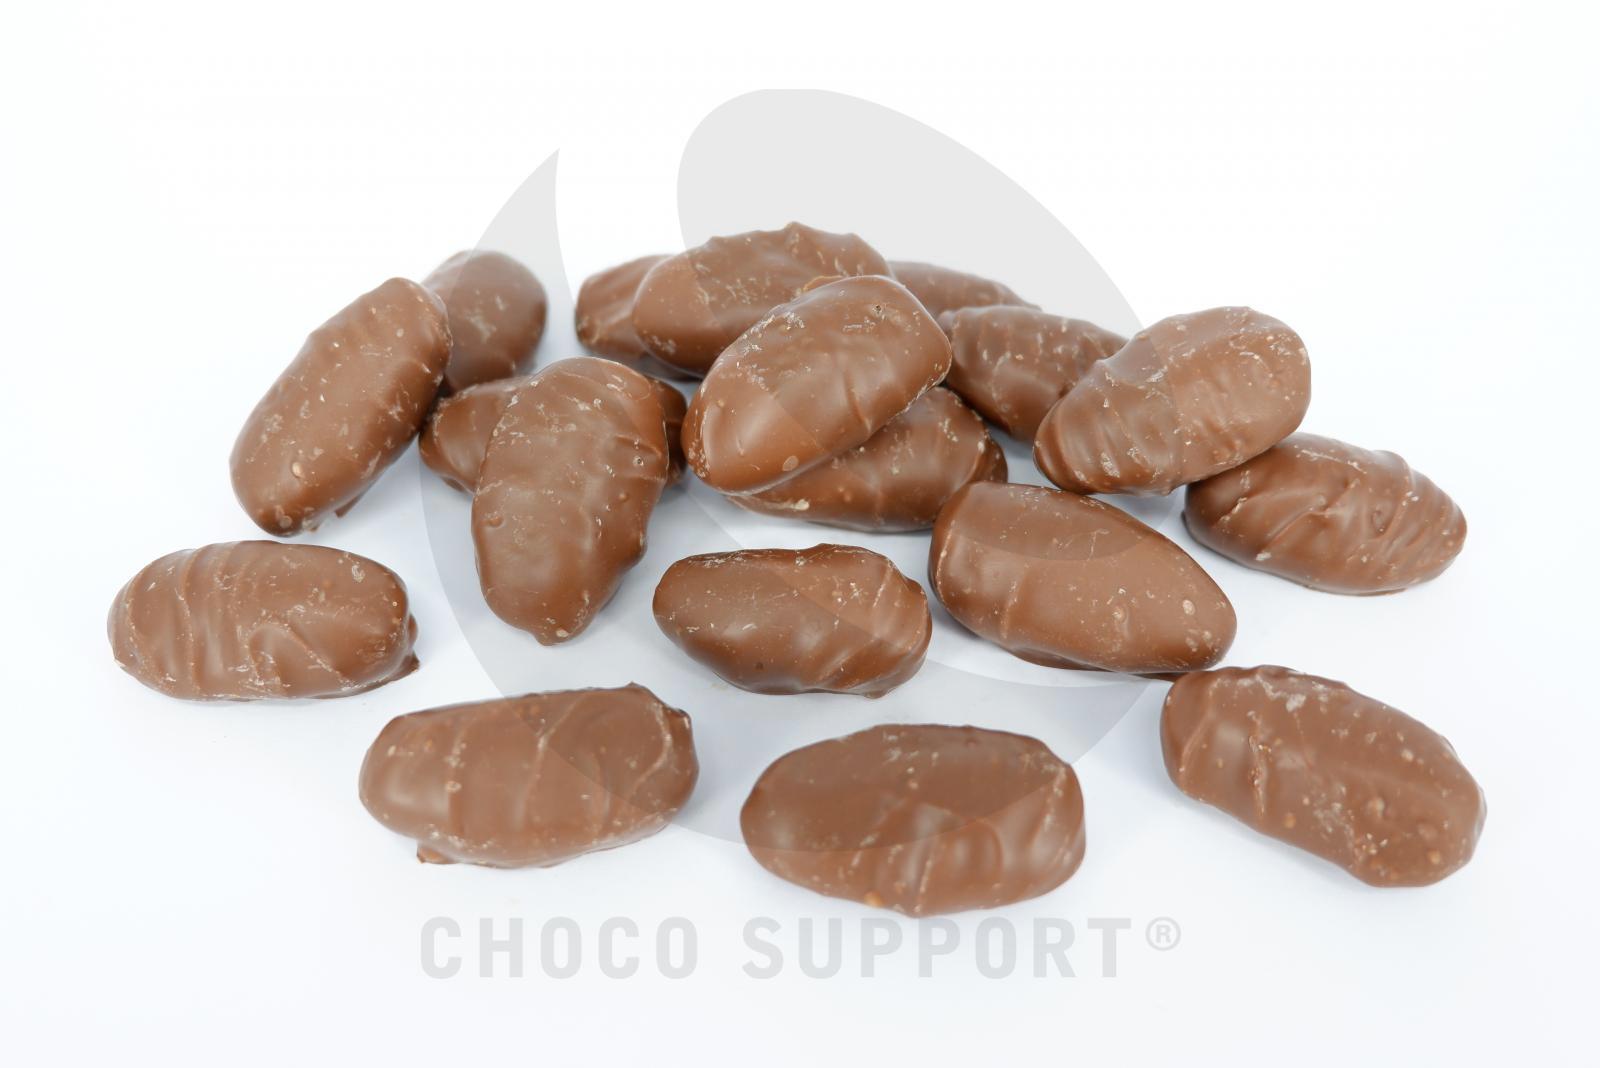 Choco Support - Quality Concepts in Chocolade